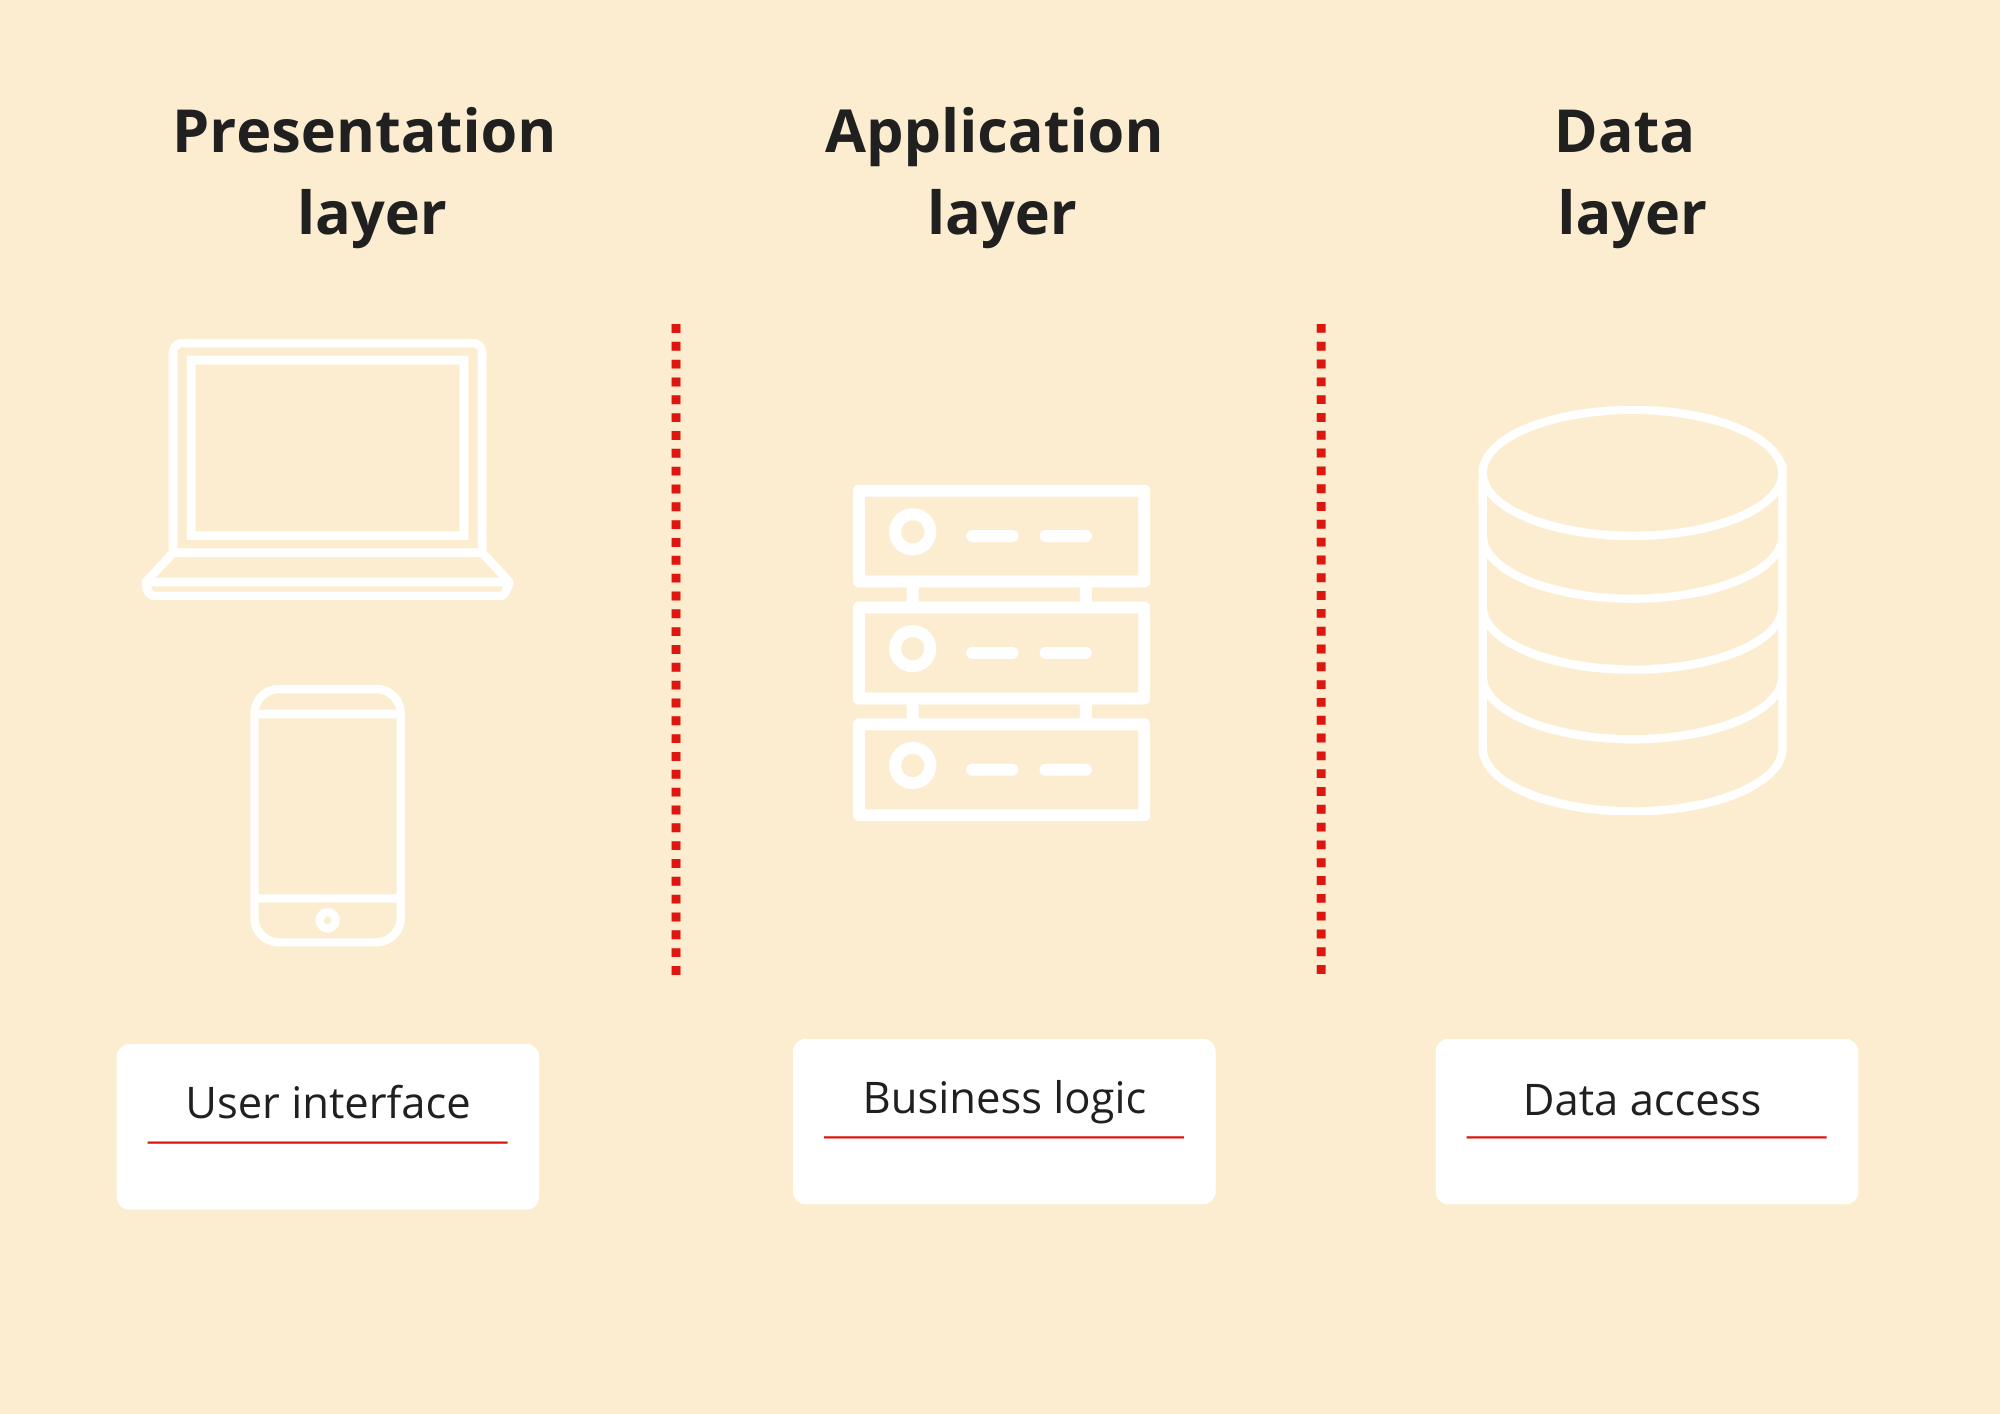 Everything You NEED to Know About WEB APP Architecture 